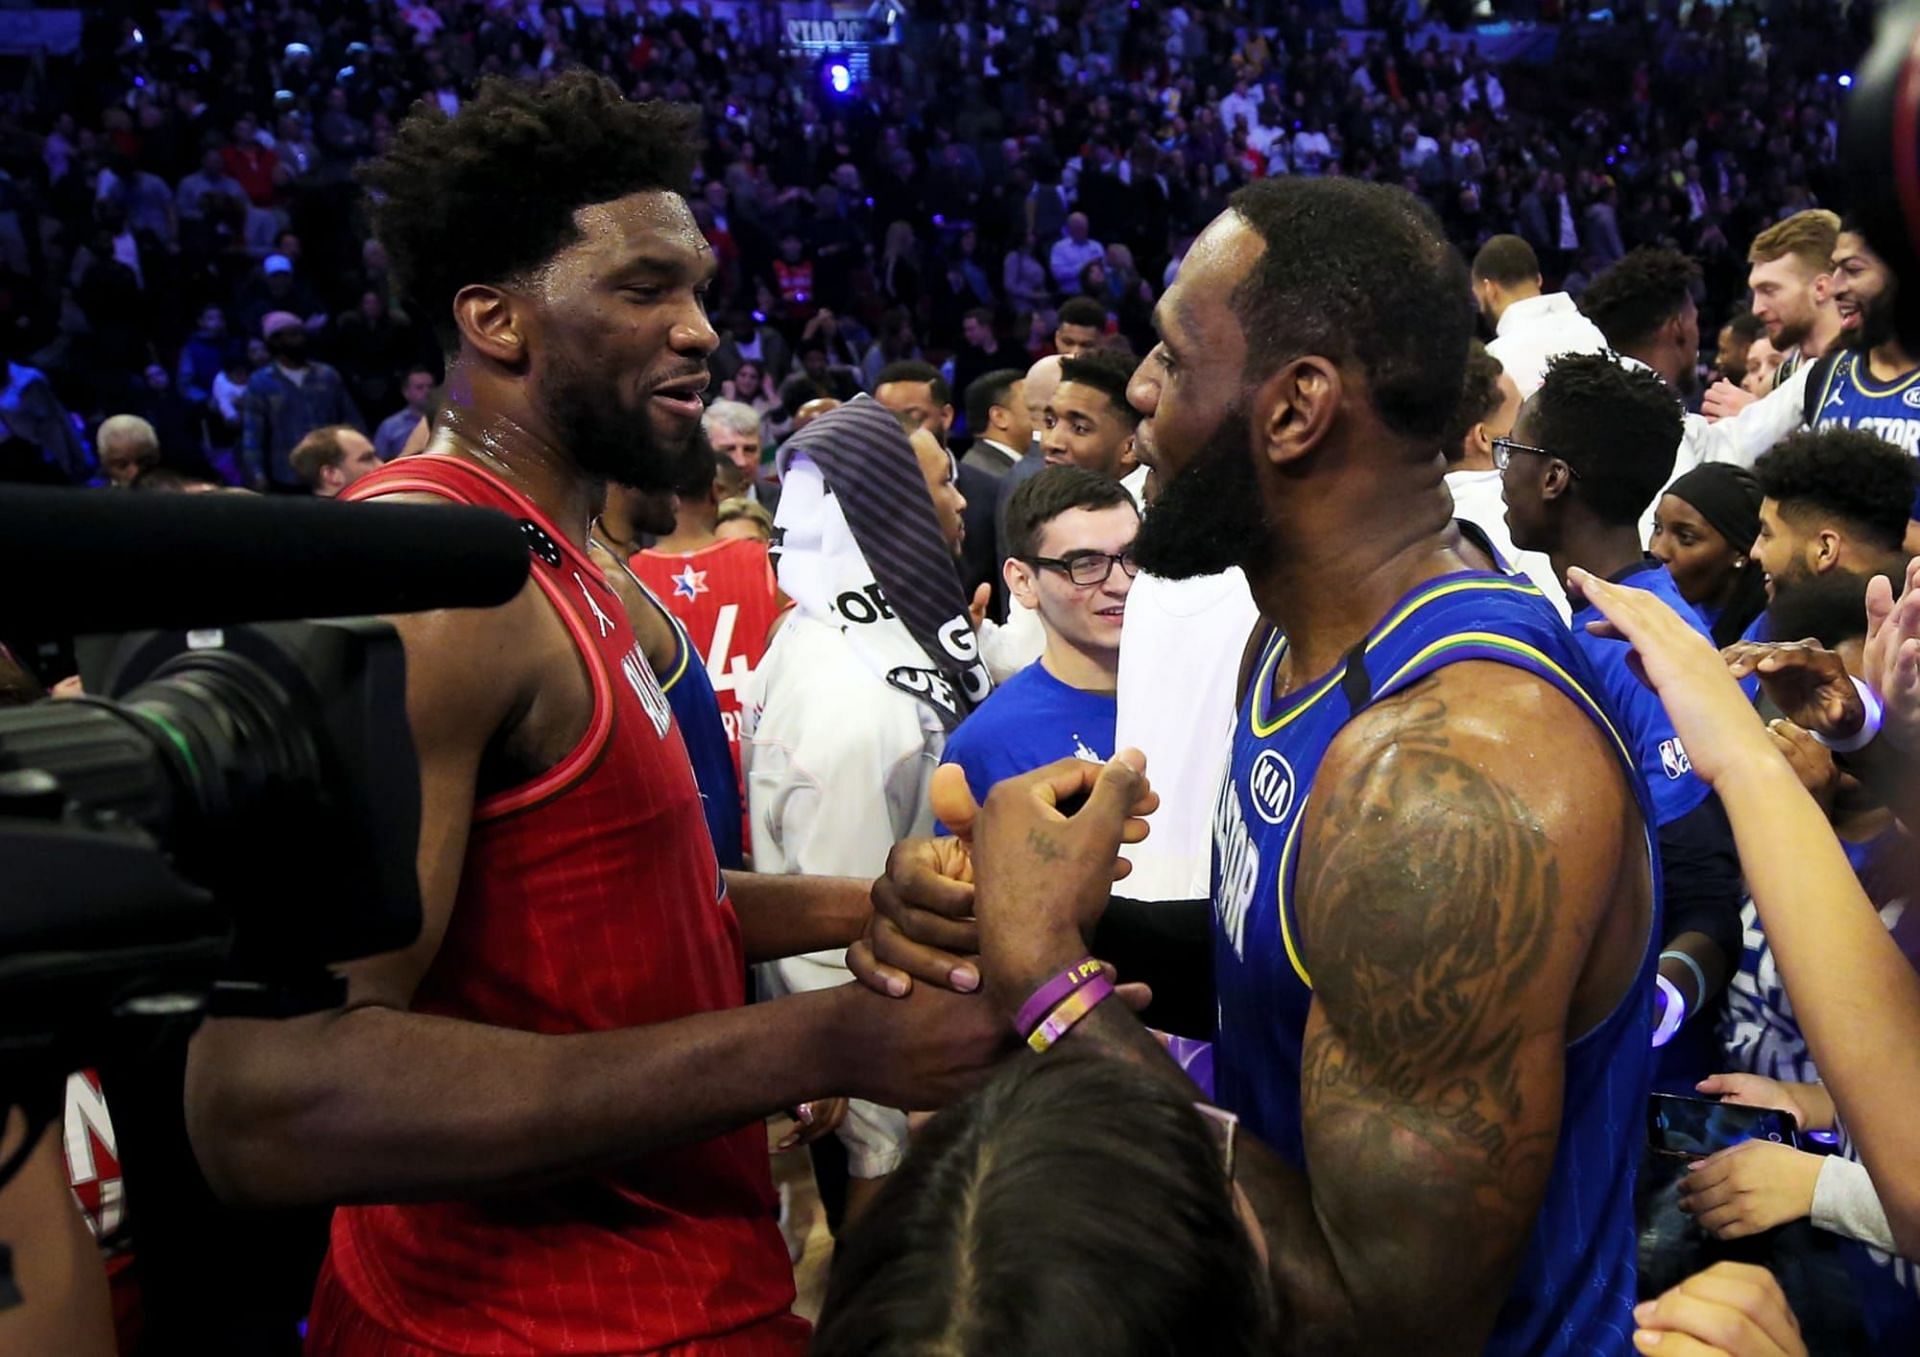 LeBron James rested his sore knee against Joel Embiid and the Philadelphia 76ers. [Photo: The Sixer Sense]